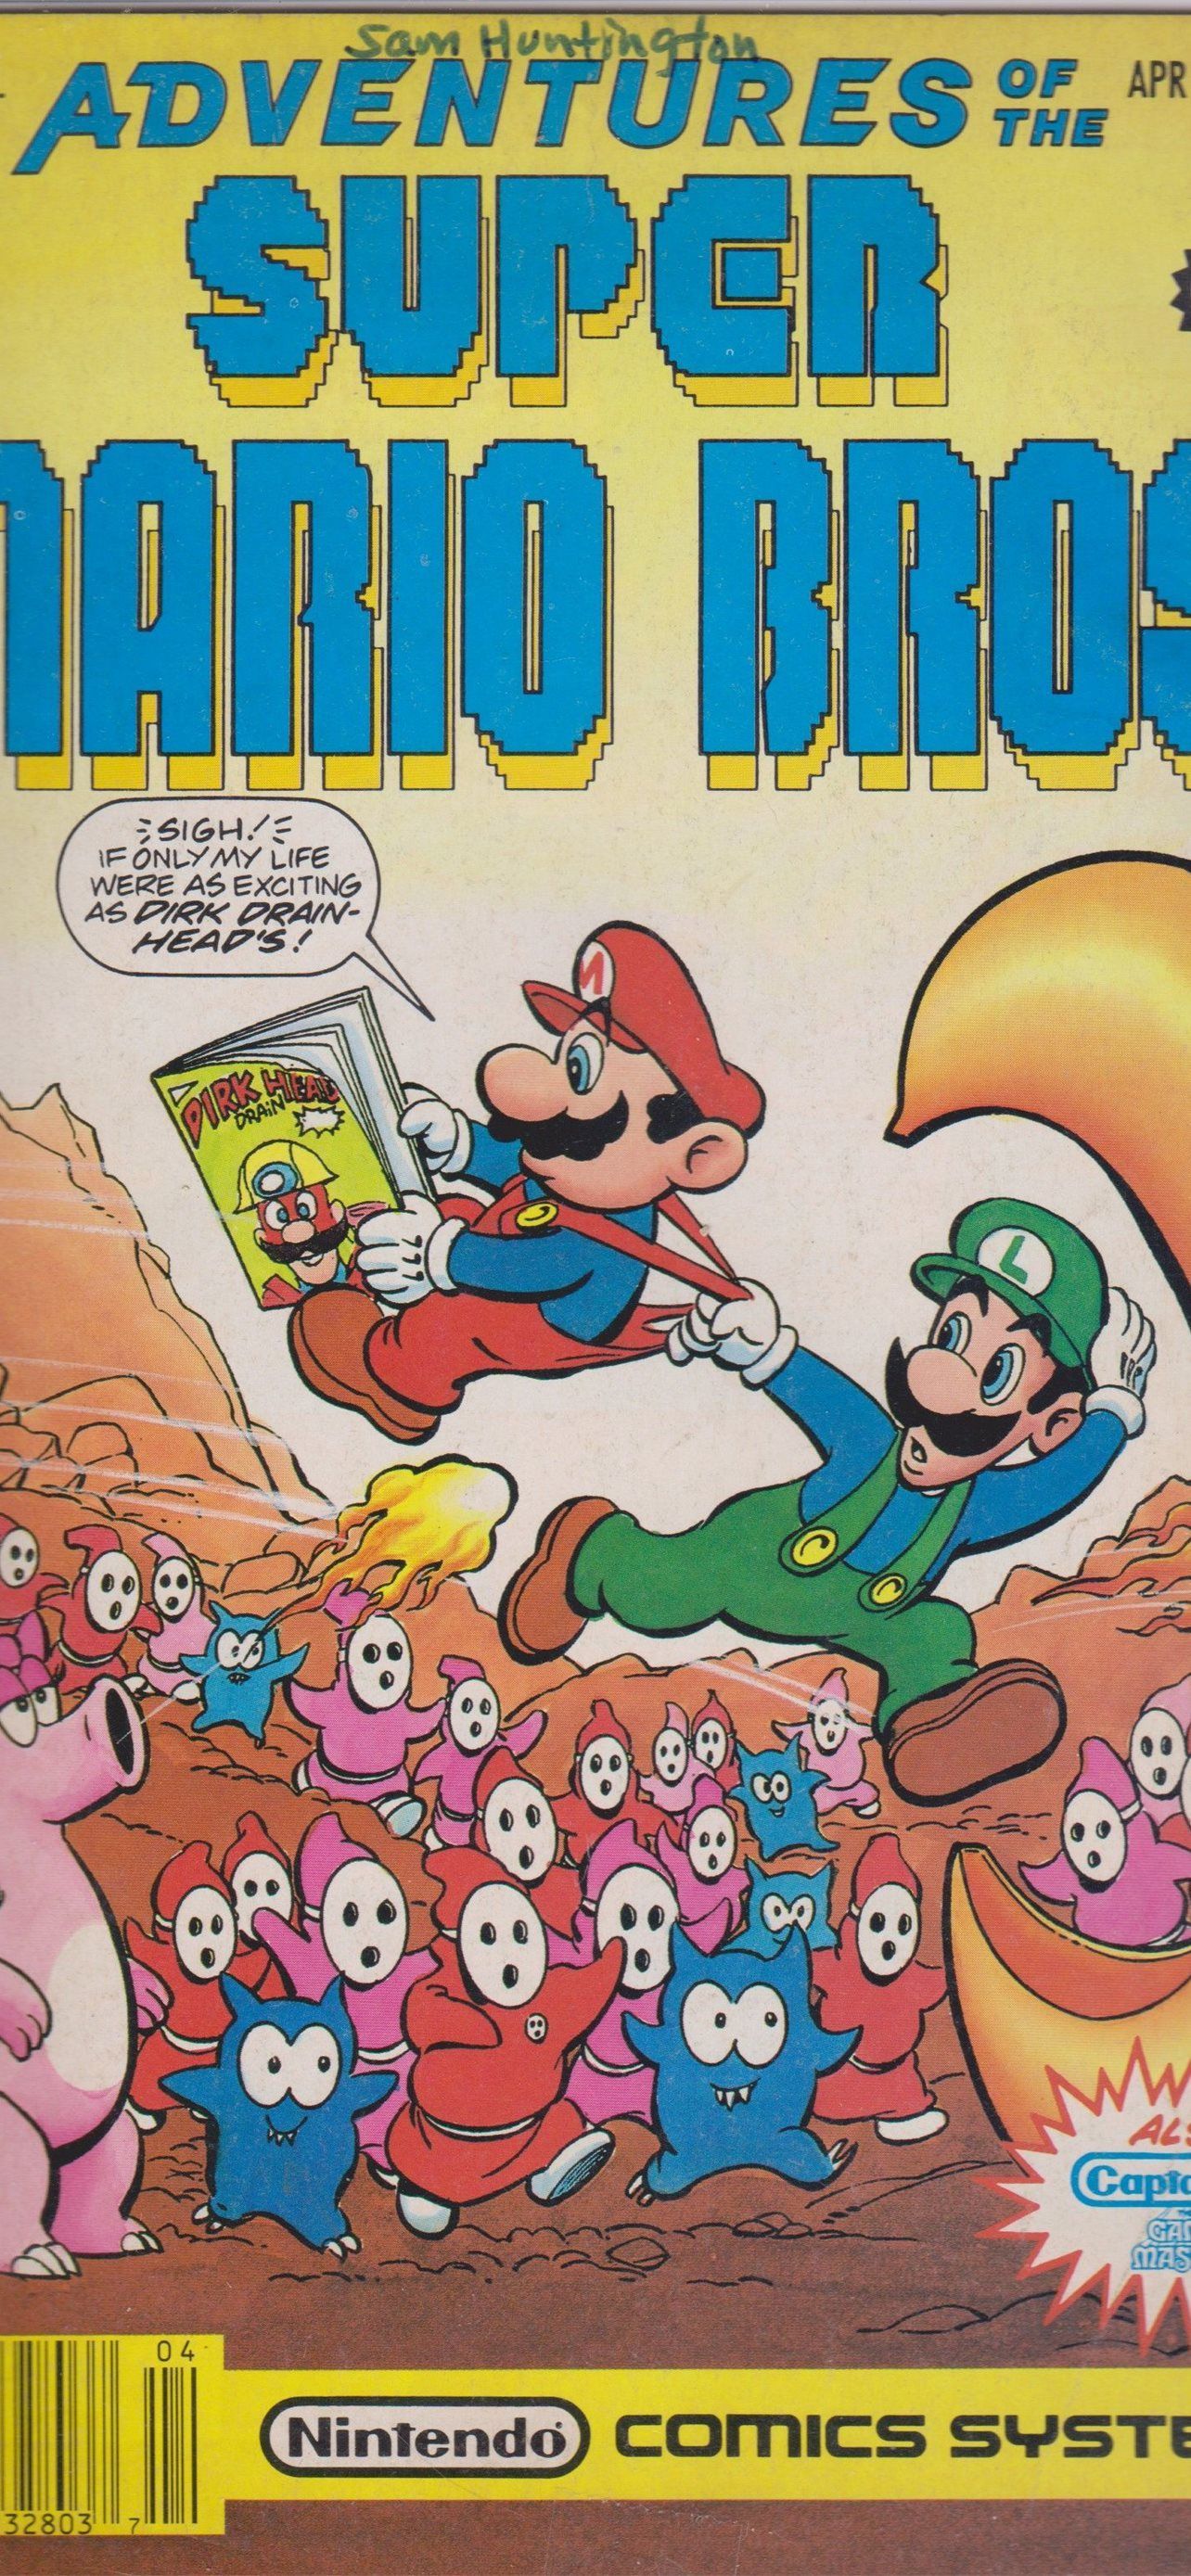 The cover of the first issue of the Adventures of the Super Mario Bros. comic series. - Super Mario